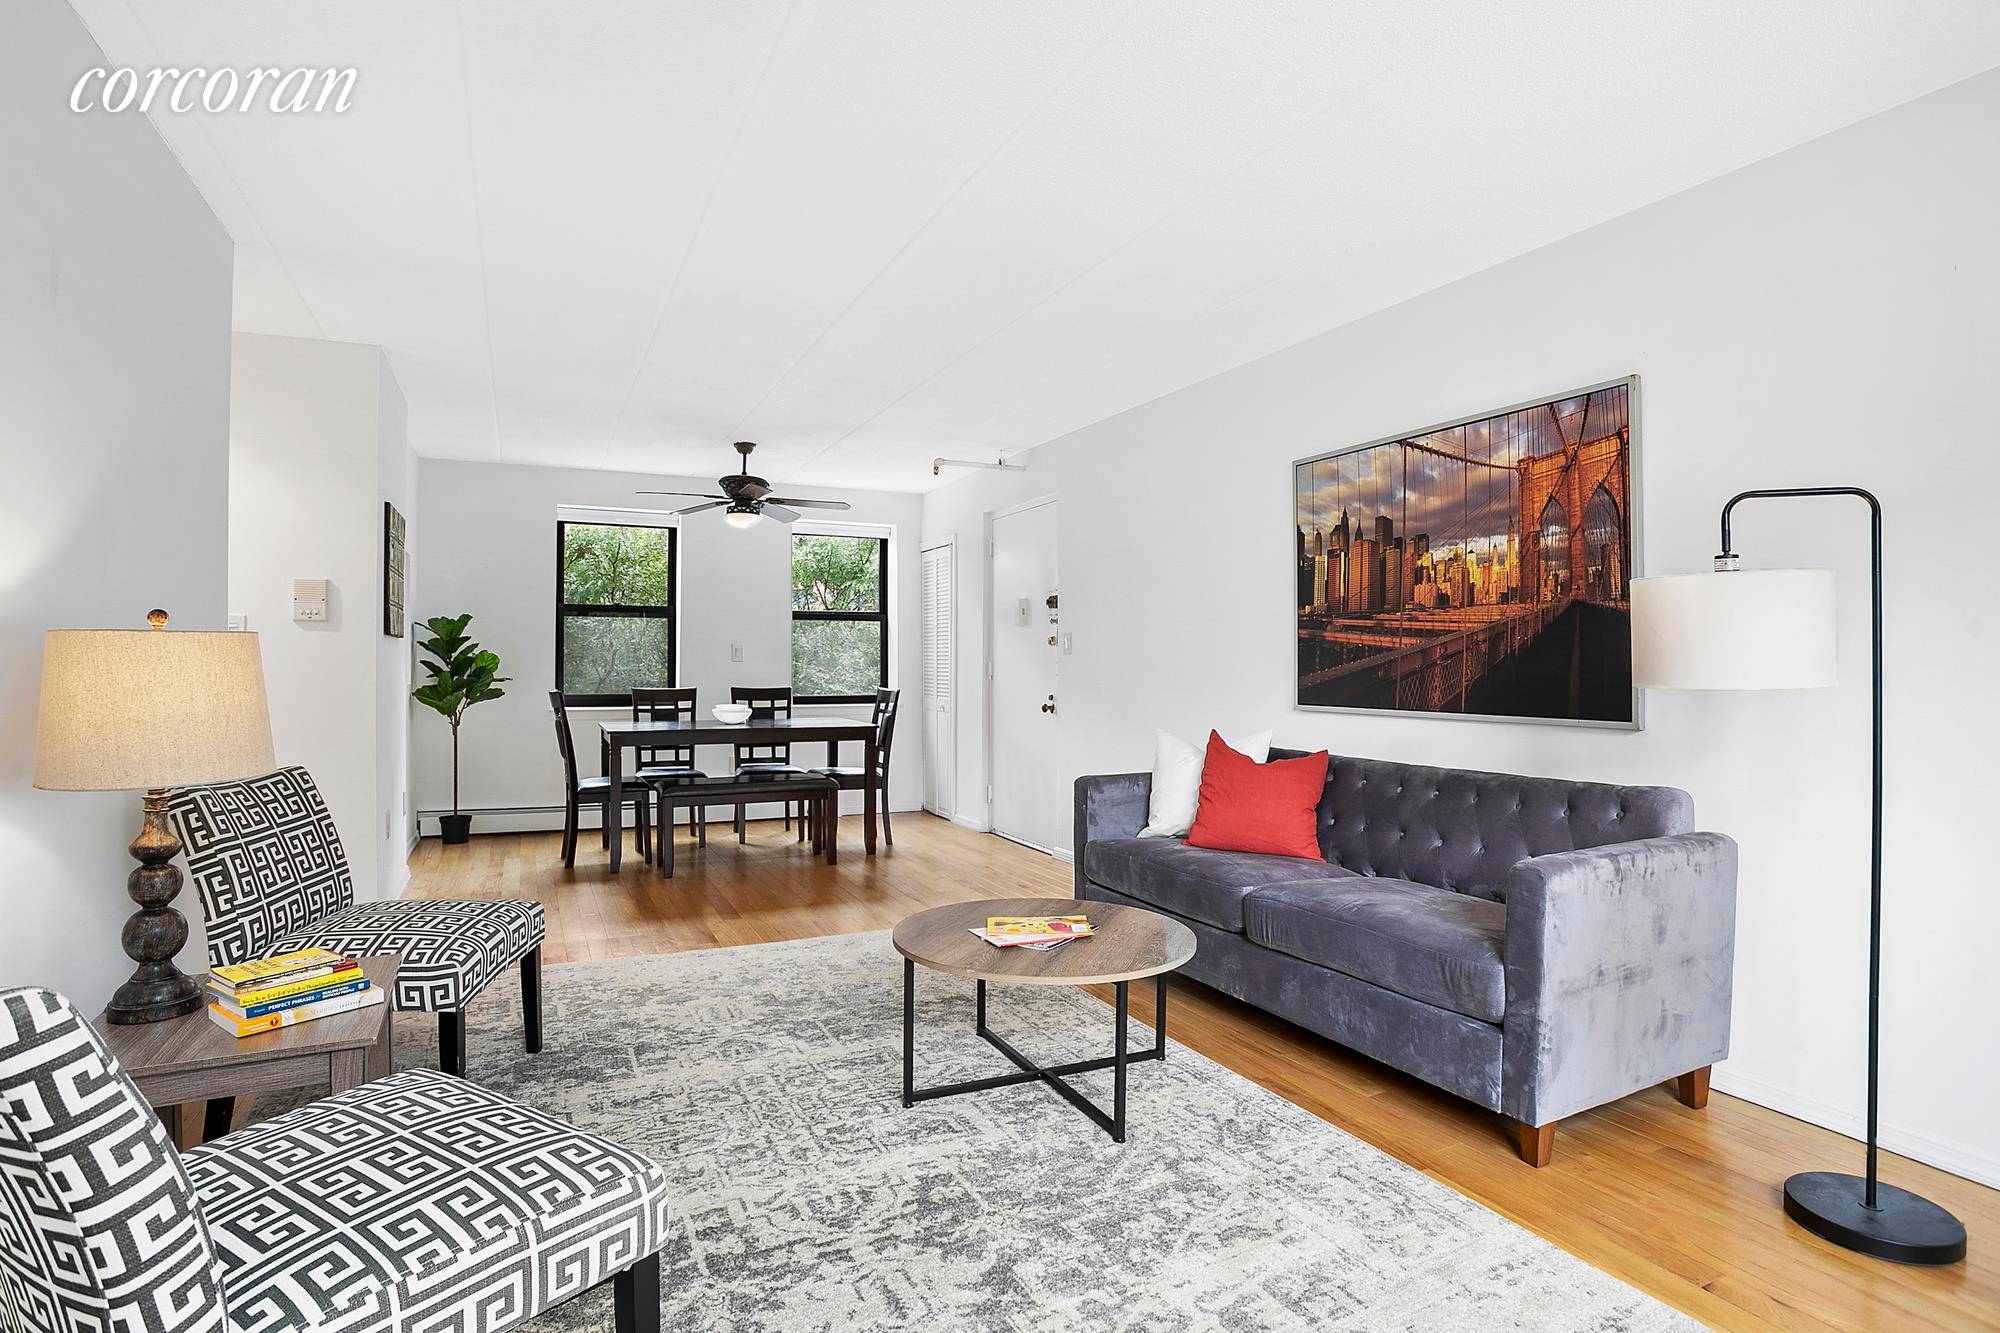 Adelphi Gardens at 438 Clermont Avenue, Unit G, with a large and well manicured common courtyard, is a light and bright, newly renovated two bedroom, one and a half bath ...